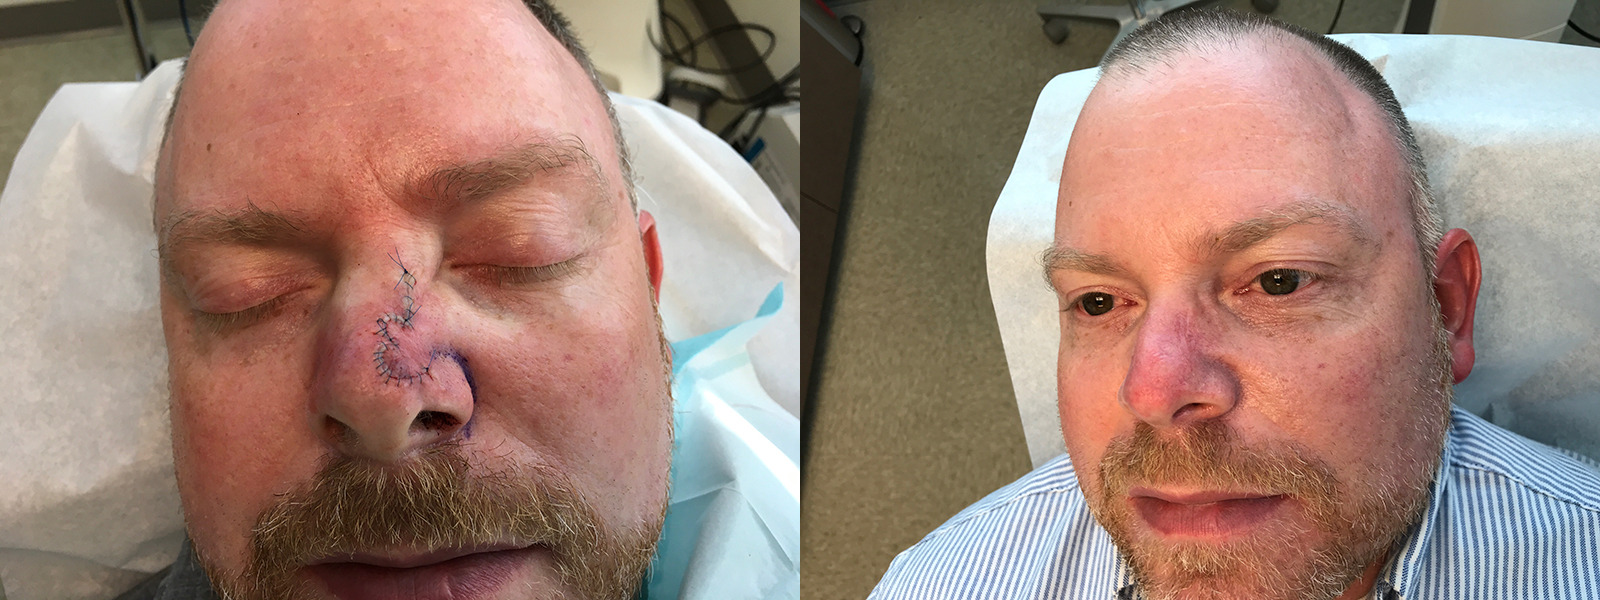 Mohs Surgery Before and After Photo by Skin Cancer Specialists in Sugar Land Texas